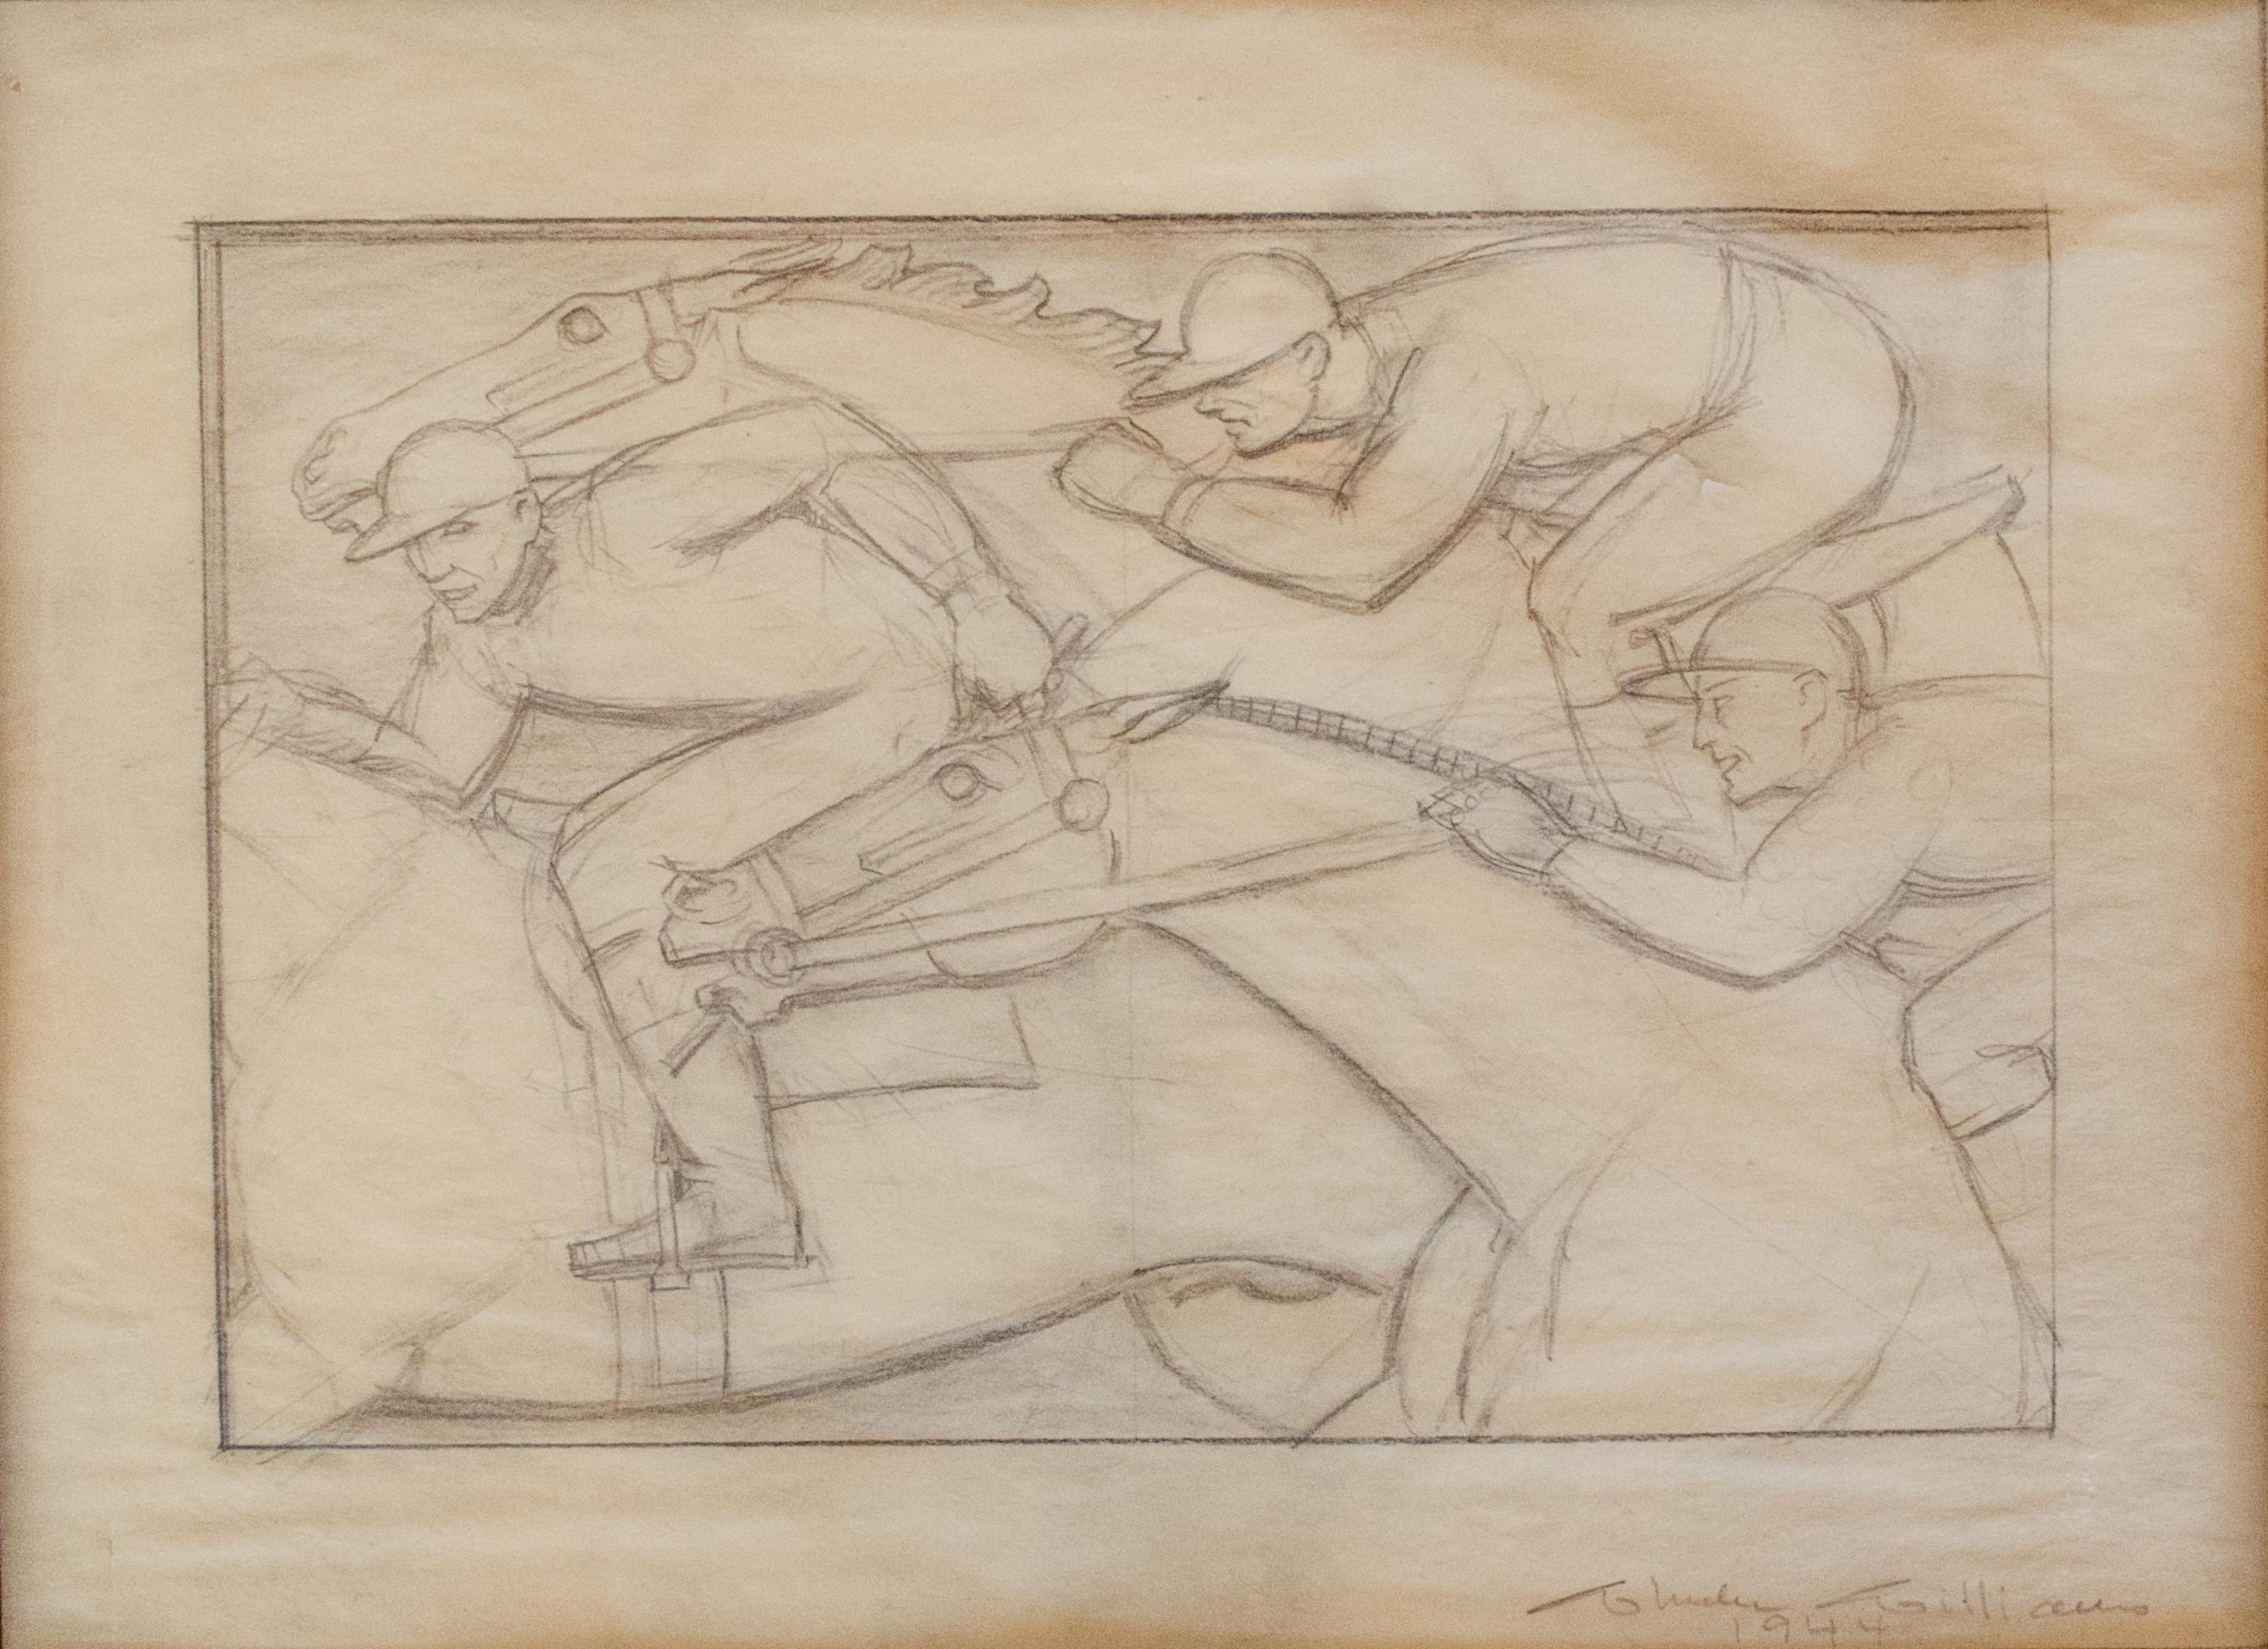 Wheeler Williams (American, 1897-1972)
Untitled Study, 1944 (Polo Players)
Pencil on paper
15 1/2 x 19 1/4 in. 
Signed lower right: Wheeler Williams, 1944
Artist studio label verso

Inscribed on mat: 
Drawings for Proposed Murals: Polo Room, Hotel